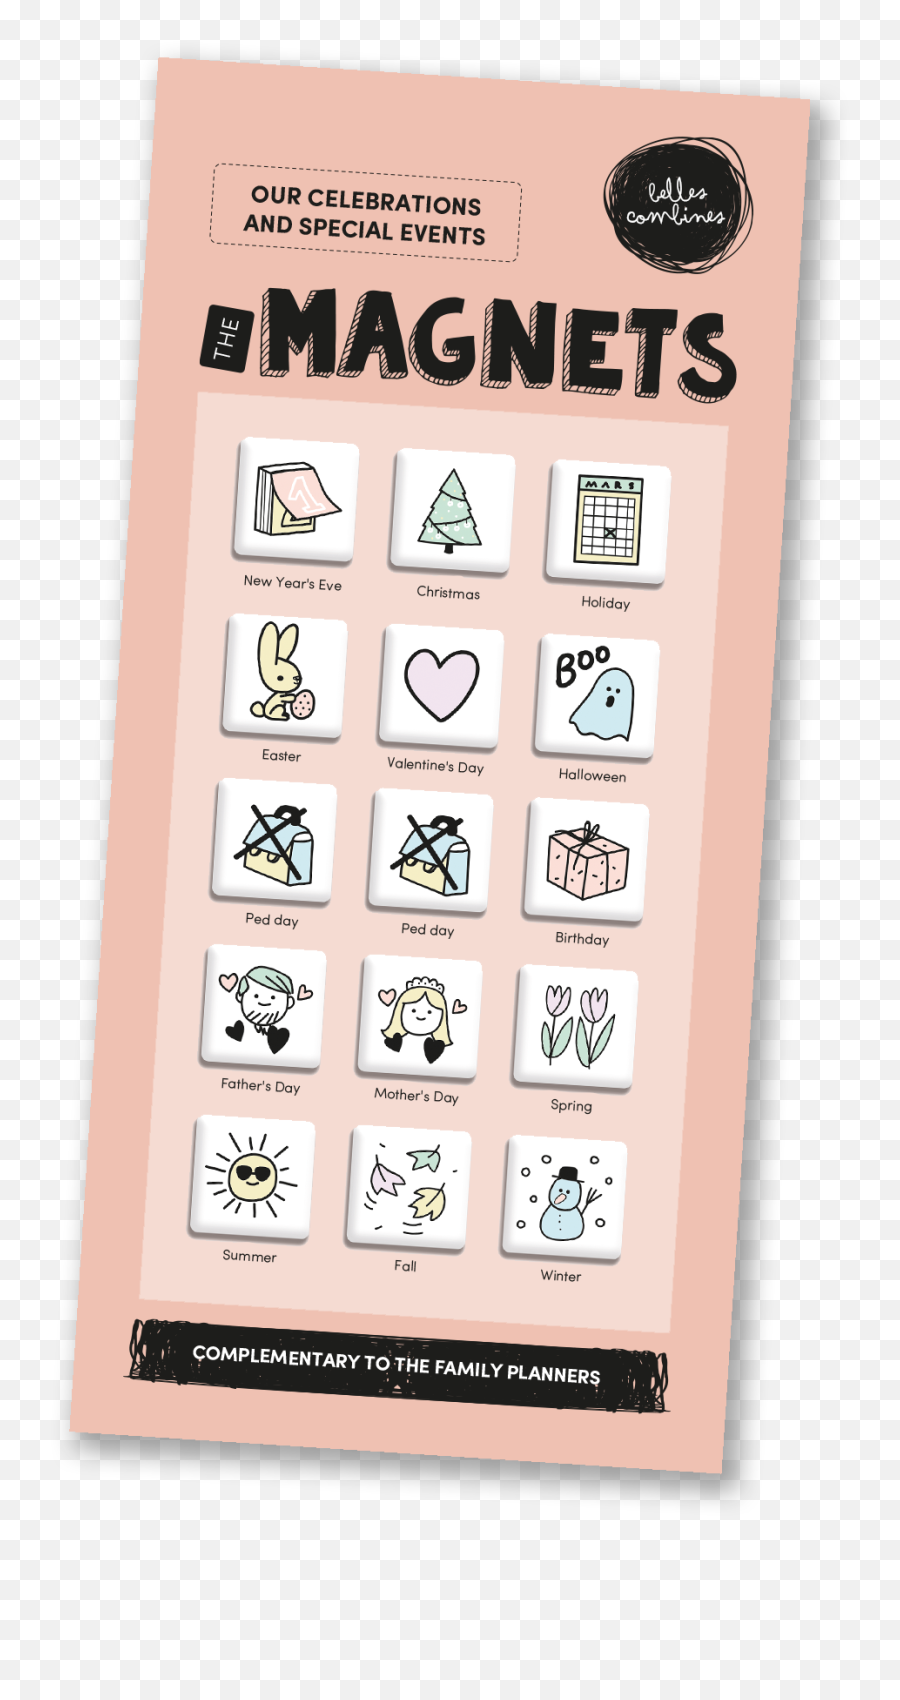 Magnets For Family Planners - Holidays And Special Occasions Les Belles Combines Les Magnétos Emoji,Crystal Emotion Showet Curtains